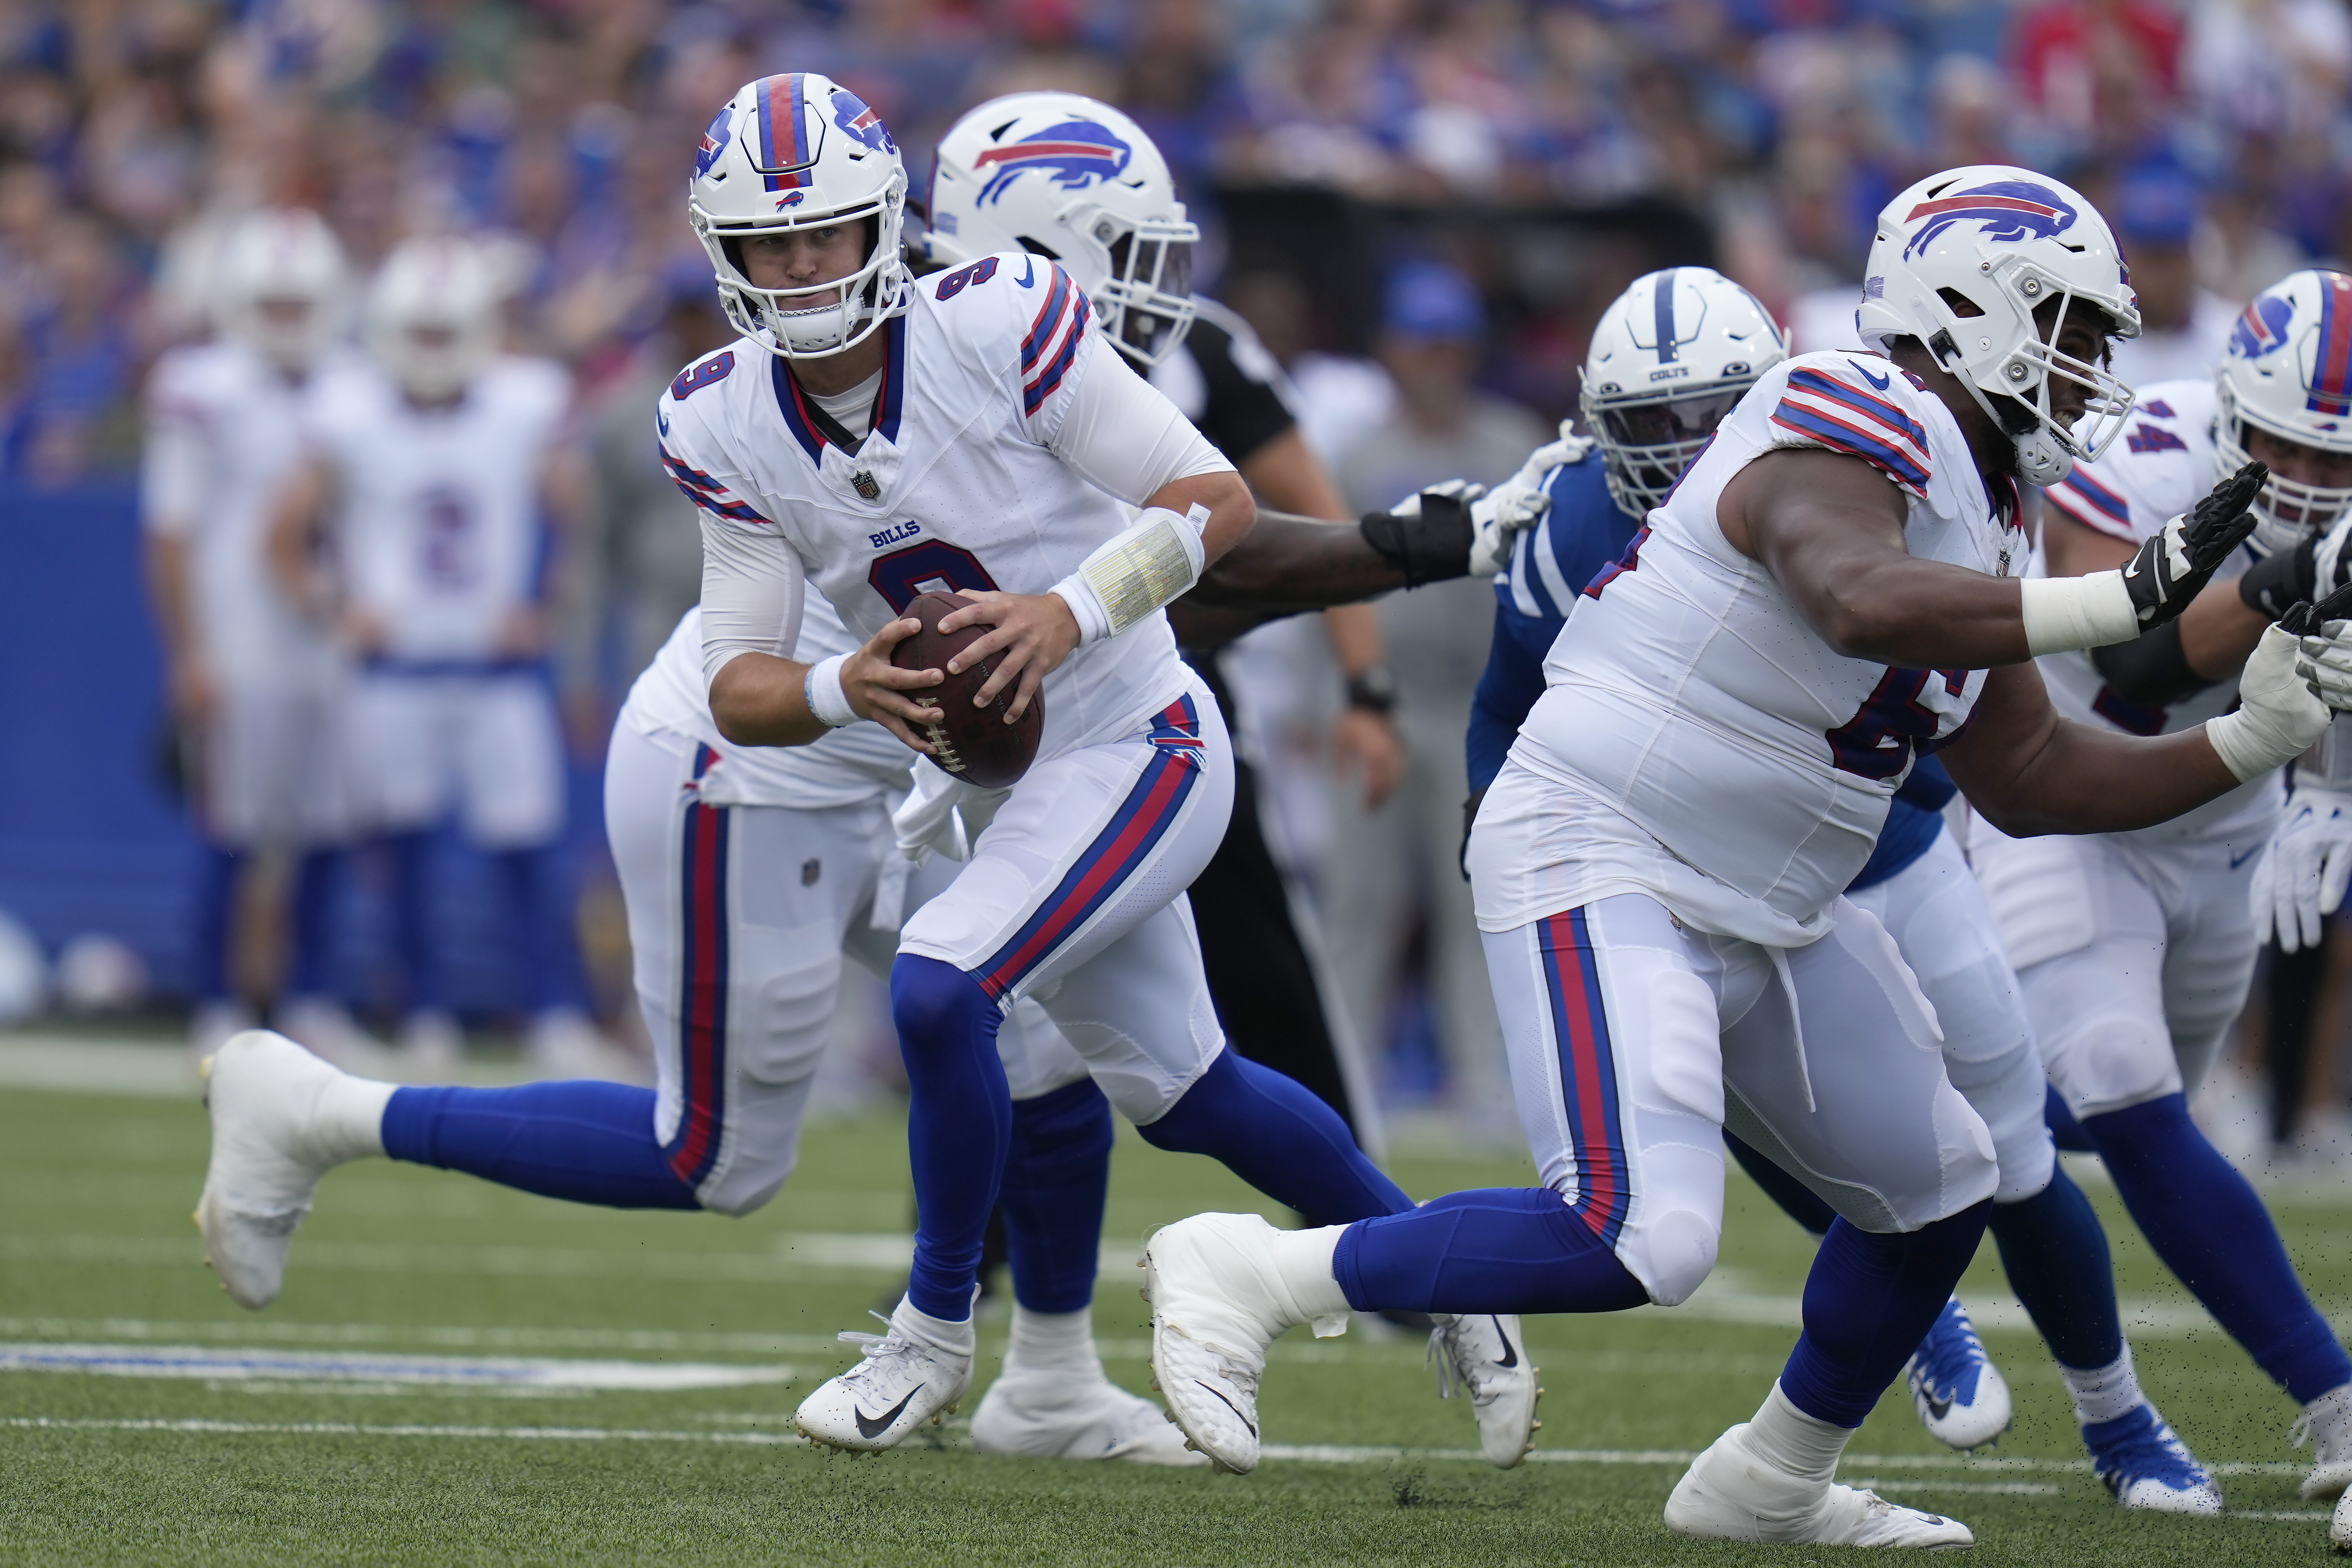 Bills vs. Jets tickets: Where to buy cheapest MetLife Stadium